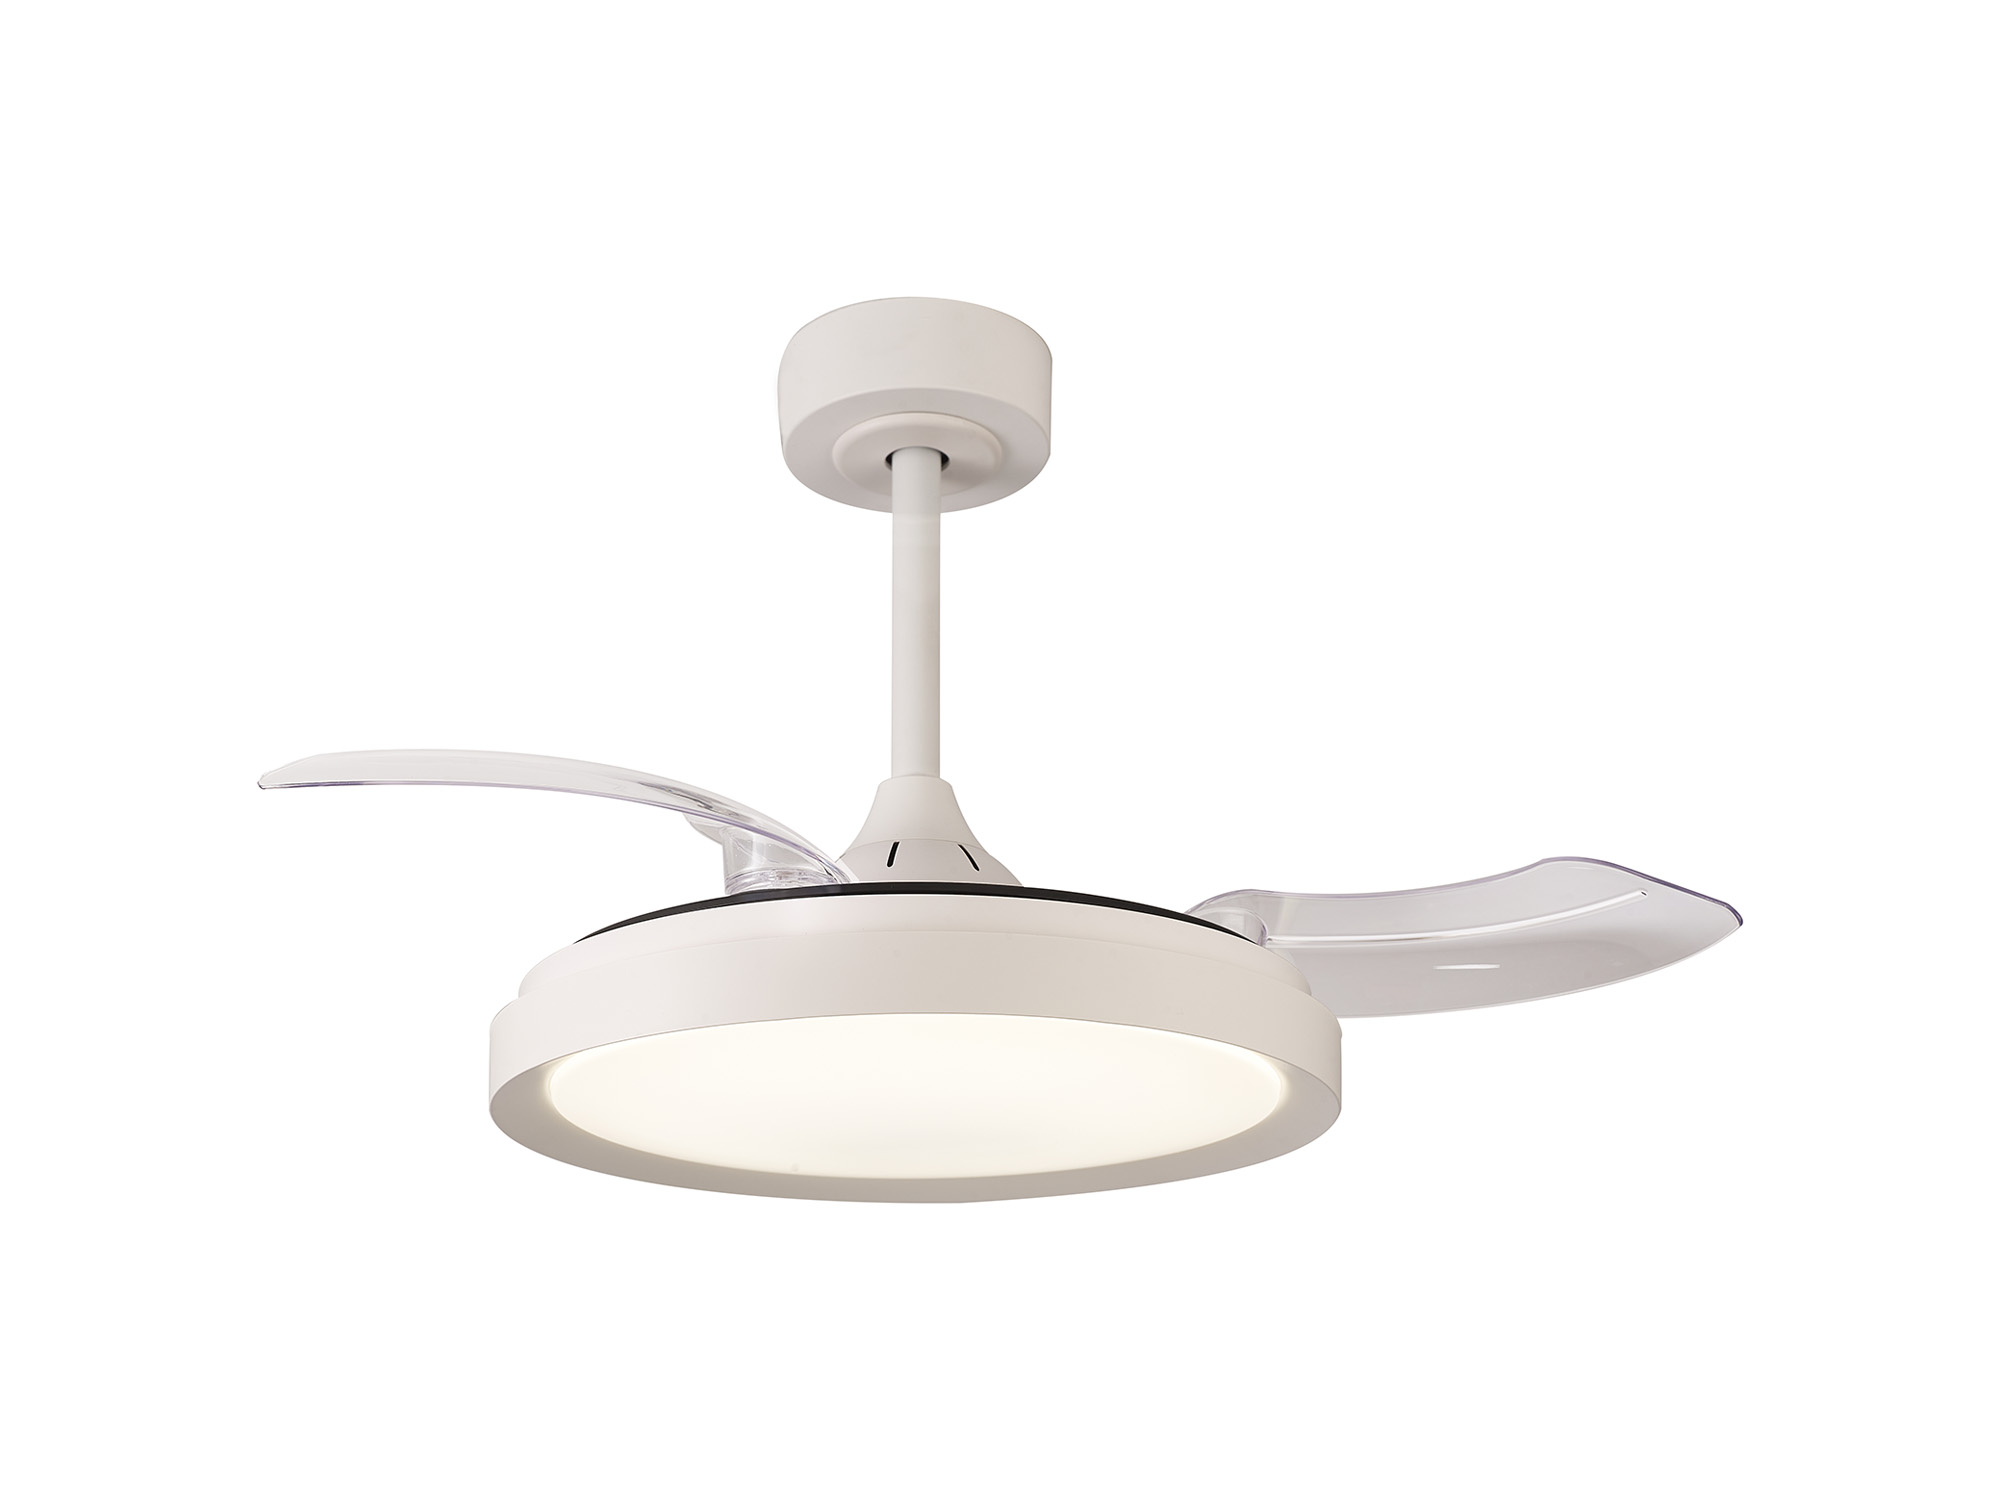 M8829  Mistral Mini 40W LED Dimmable Ceiling Light With Built-In 28W DC Fan, 2700-5000K Remote Control, White